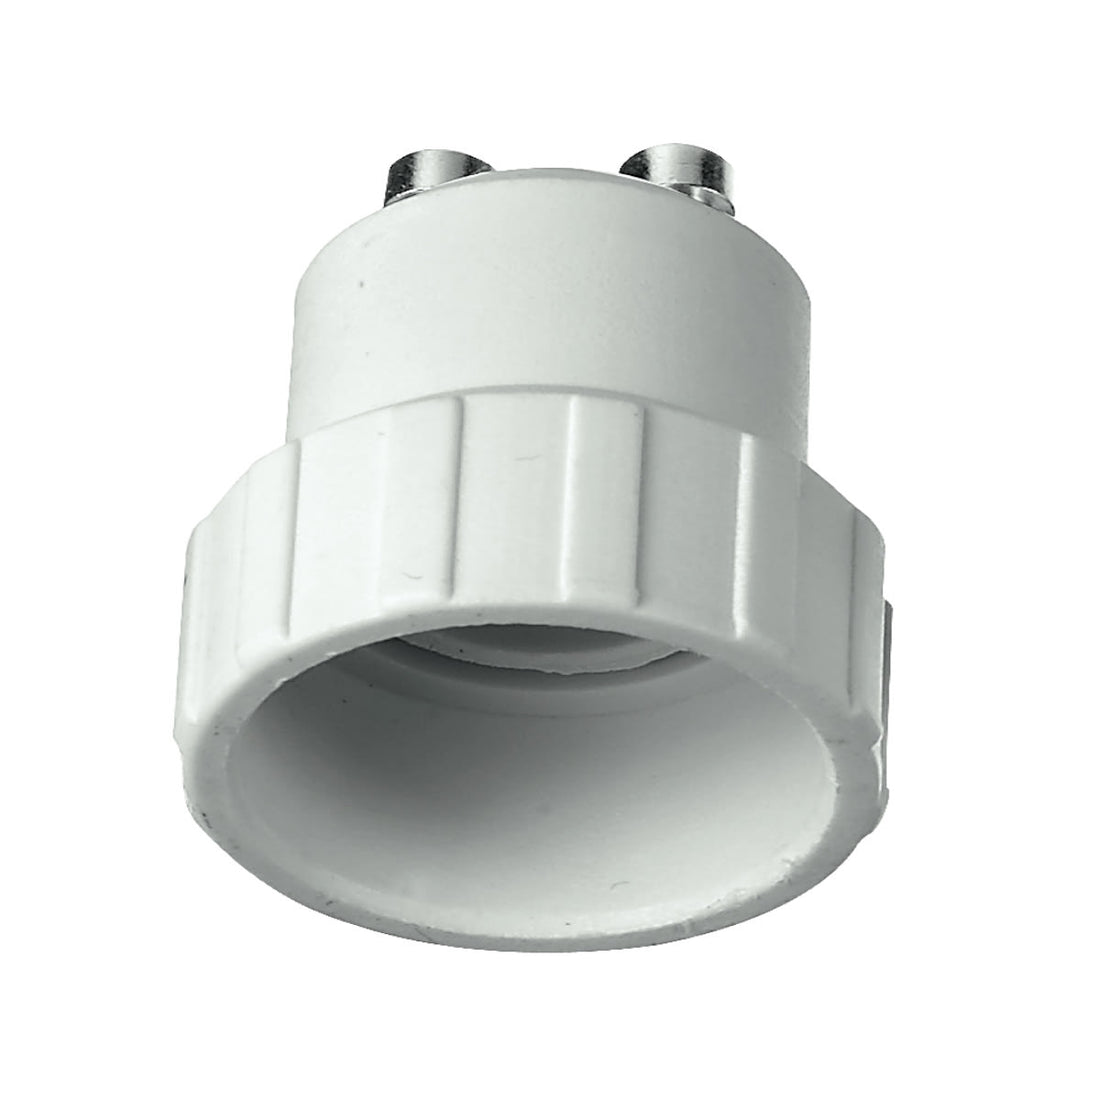 ADAPTER FOR GU10 TO E14 LAMPS